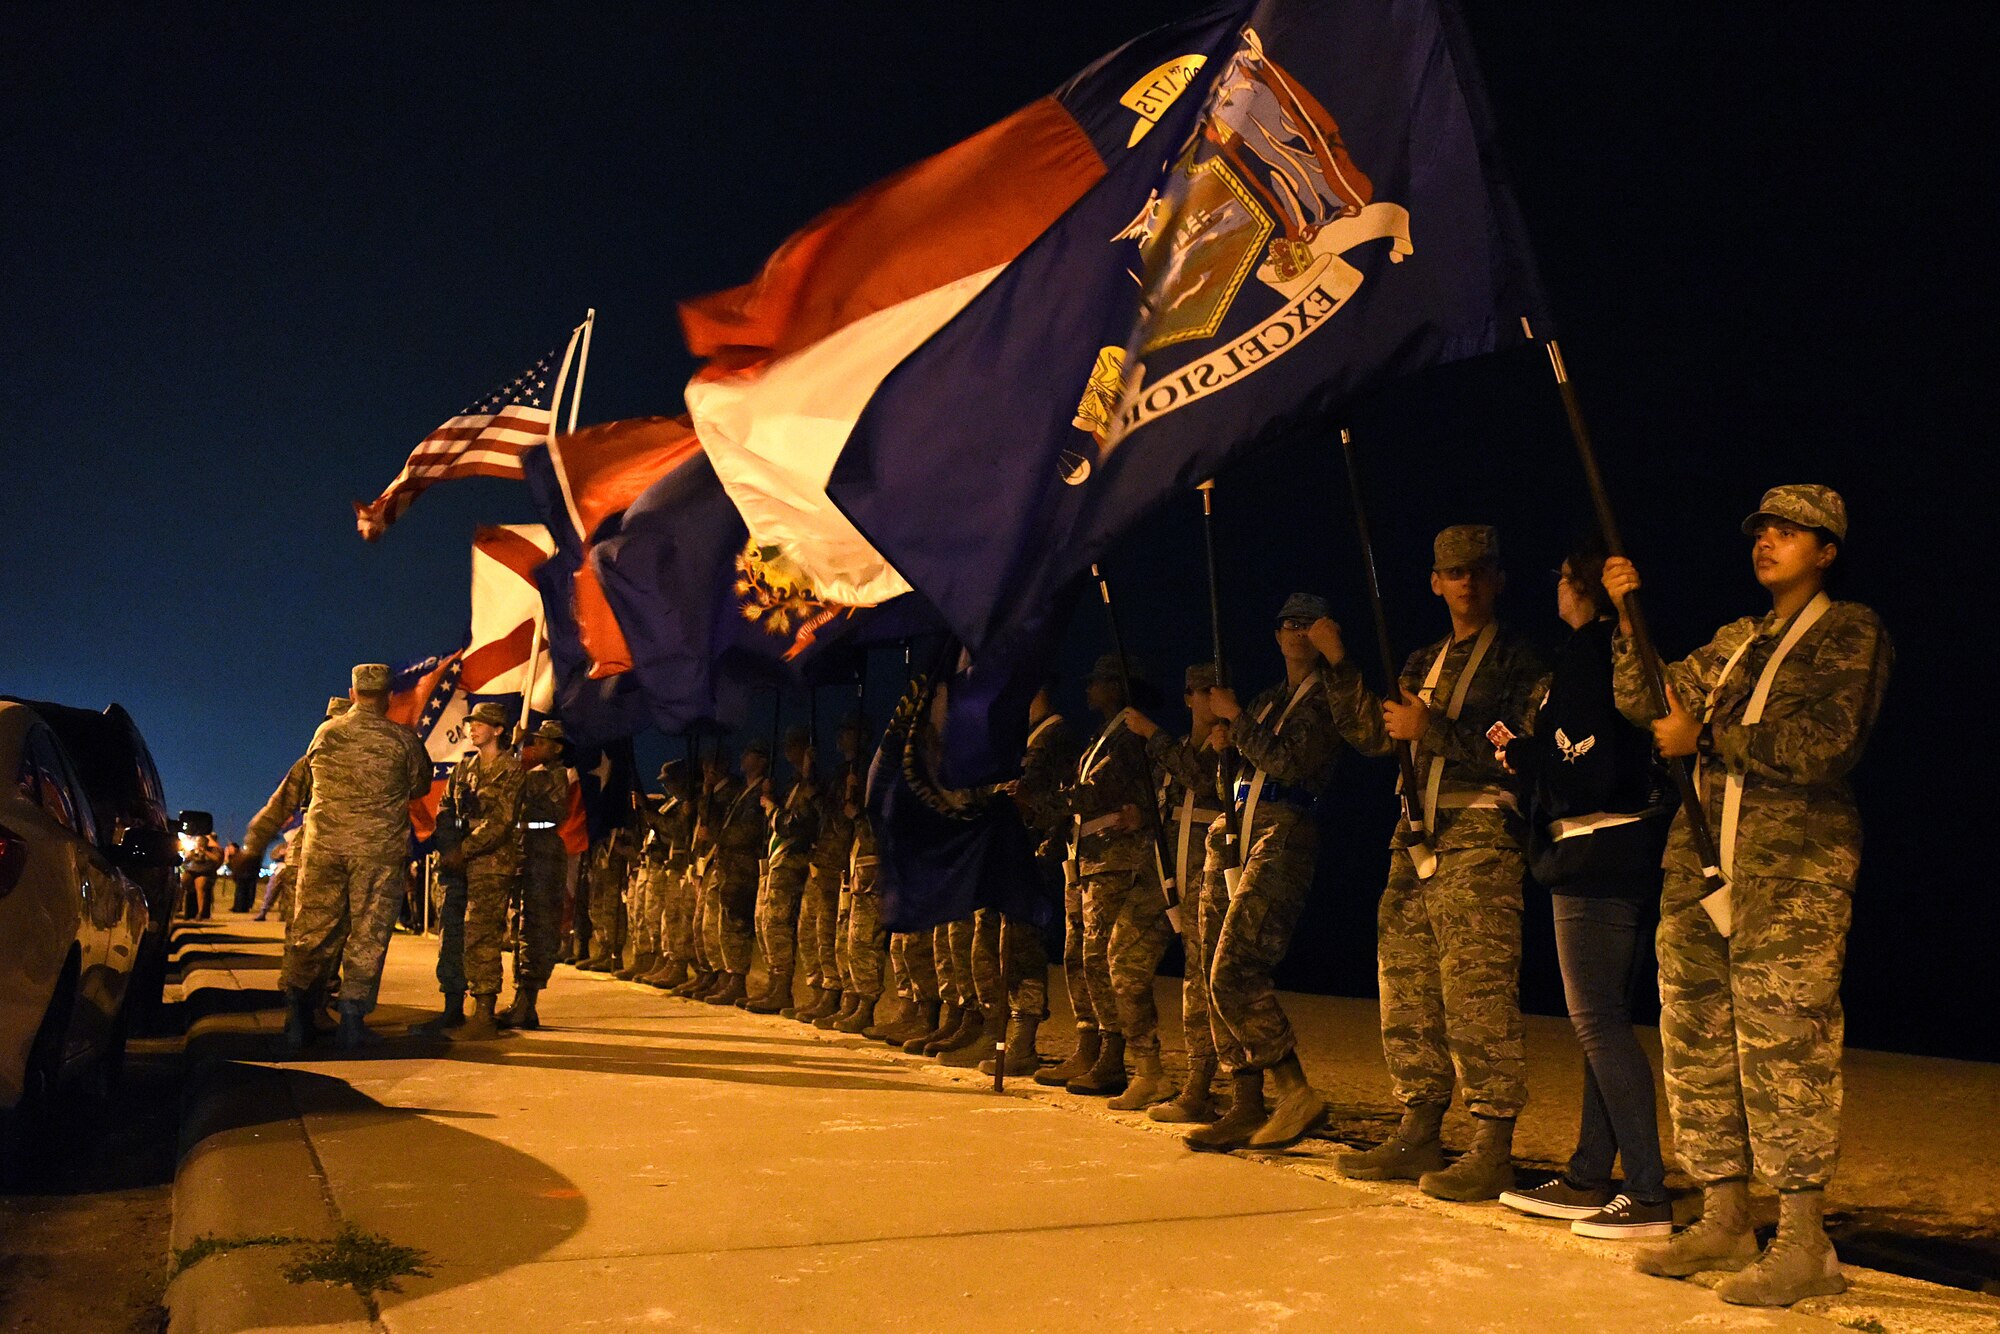 Airmen from the 81st Training Group hold the 50 flags during the Sepcial Tactics Memorial Ruck March in Biloxi, Mississippi, March 1, 2019. Twenty Special Tactics Airmen ruck from Medina Annex at Lackland Air Force Base, Texas, to Hurlburt Field, Florida, to pay tribute to Staff Sgt. Dylan J. Elchin, who was killed in Afghanistan on Nov. 27, 2018, and 19 other Special Tactics Airmen who have been killed in action since 9/11. The ruck march takes ST members across five states and 830 miles. (U.S. Air Force photo by Senior Airman Suzie Plotnikov)